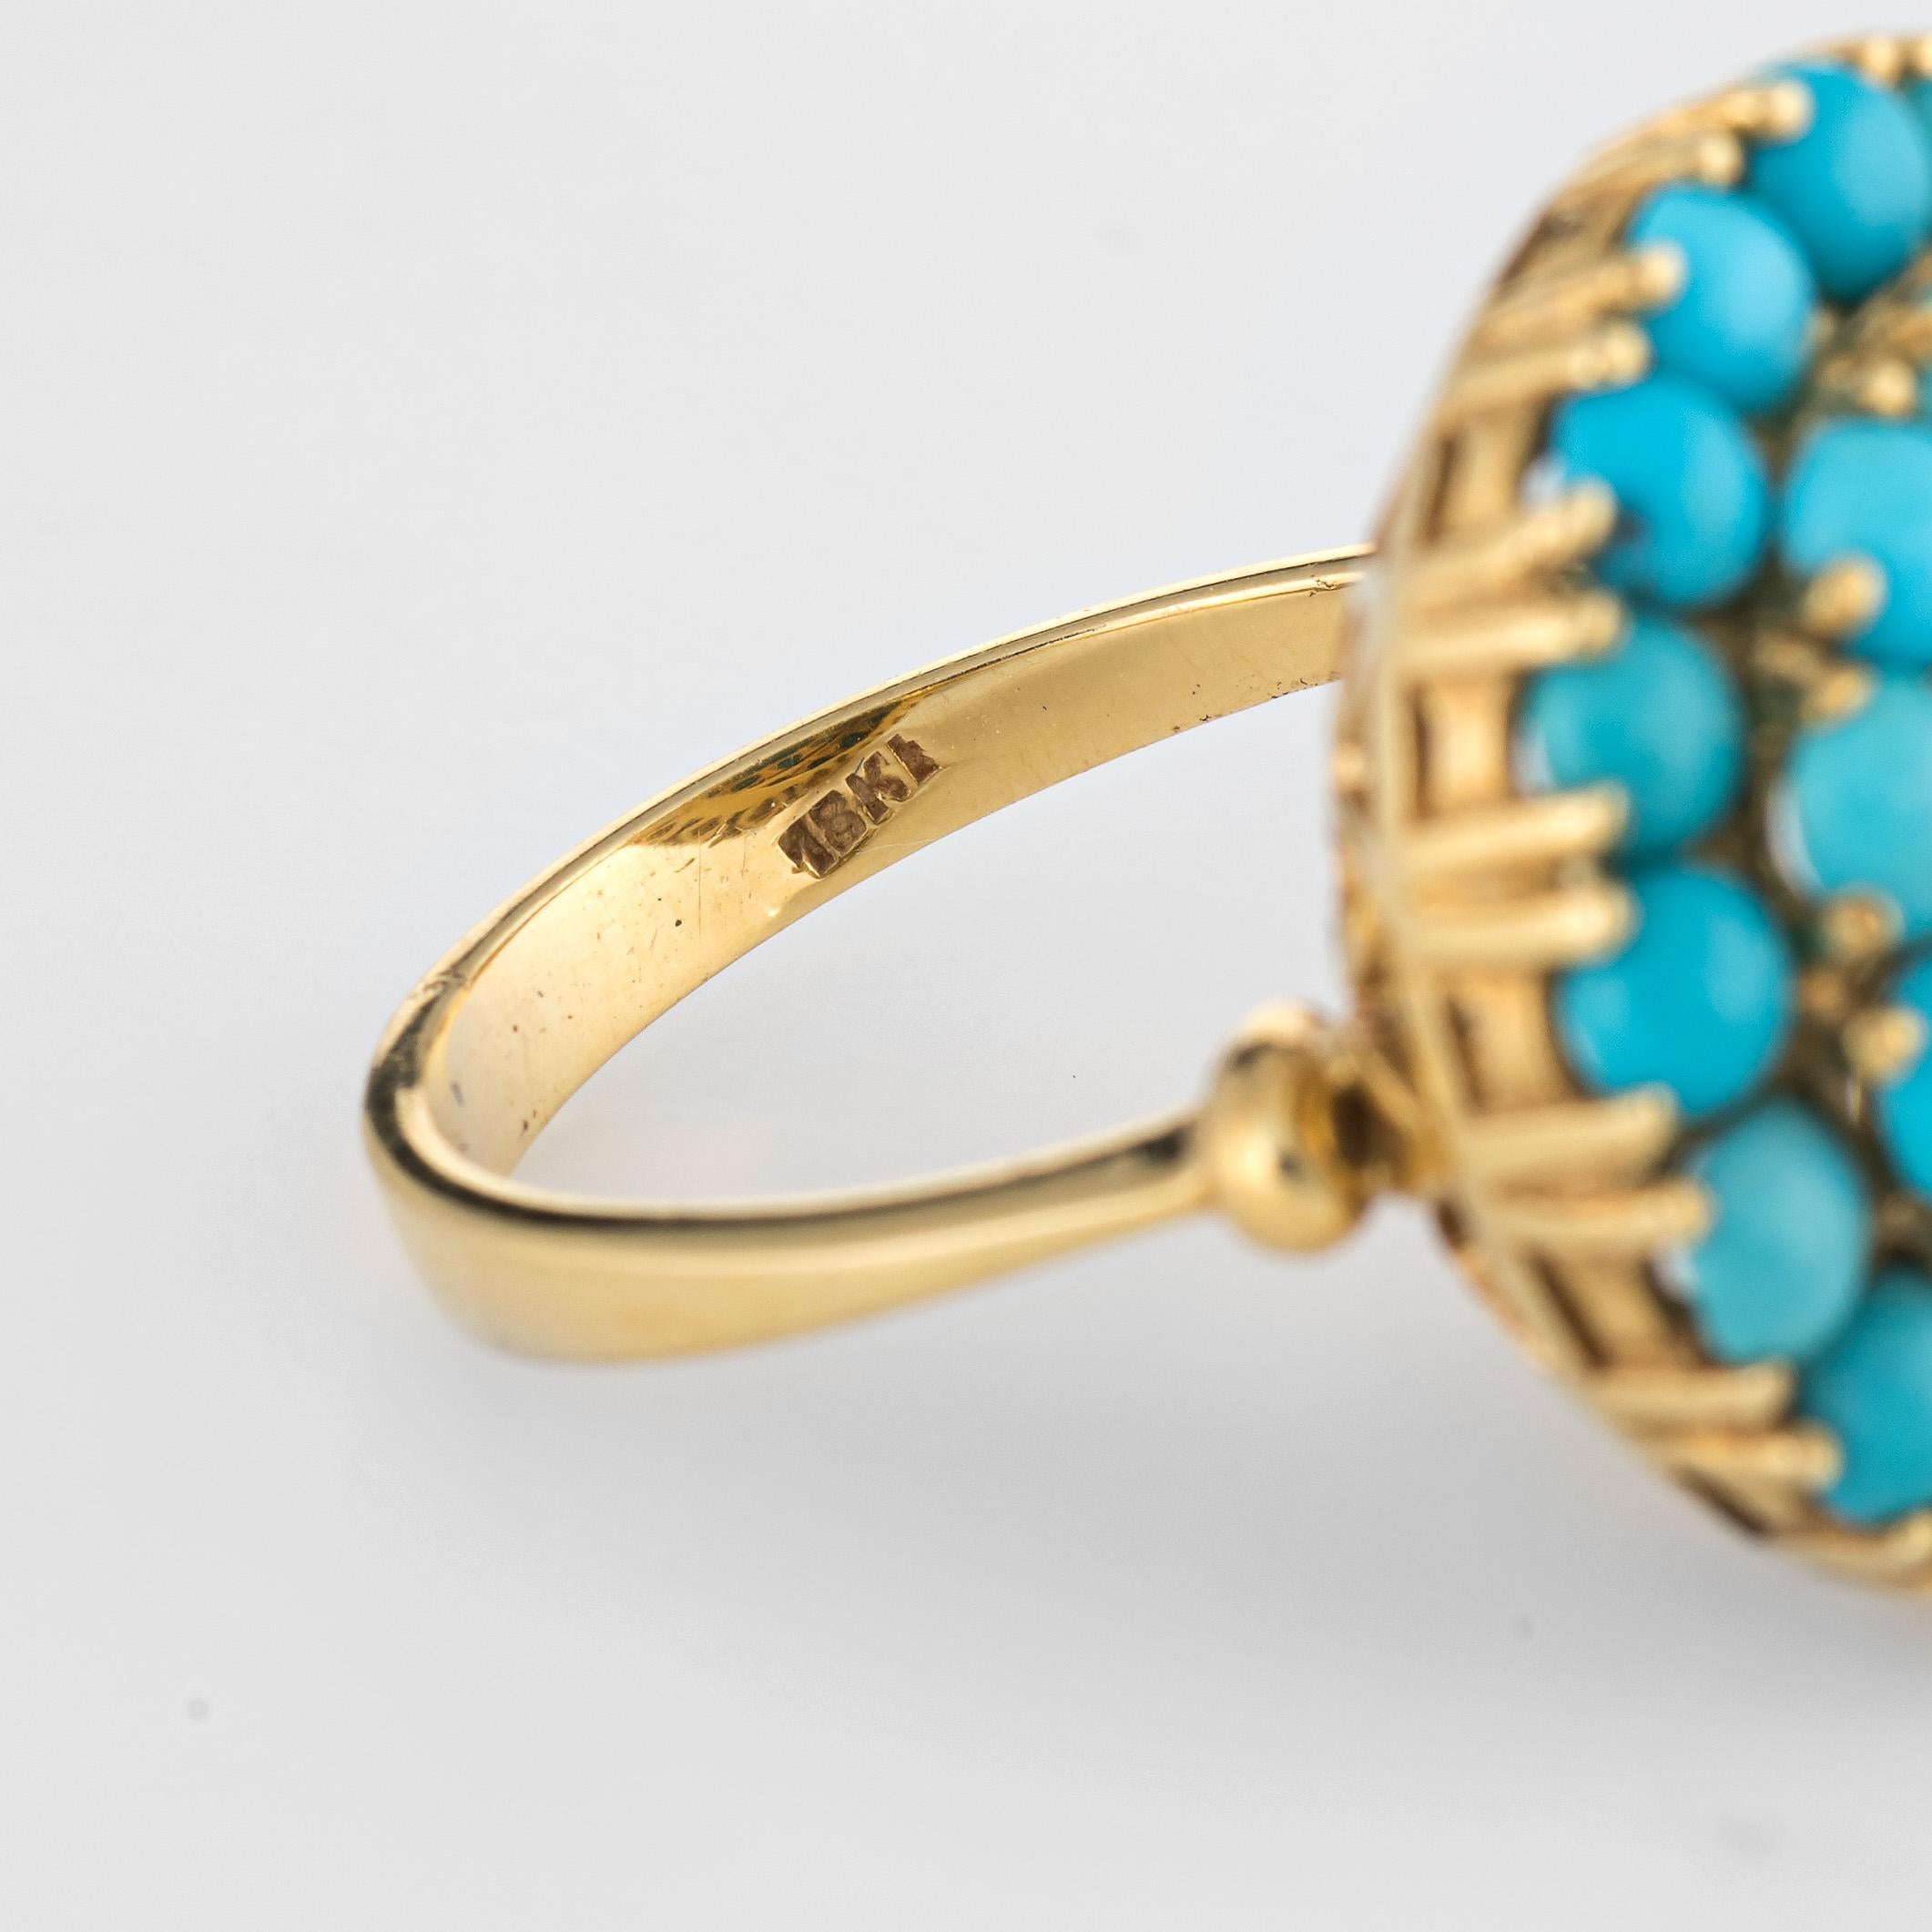 Round Cut Persian Turquoise Ring Vintage 18 Karat Gold Round Cluster Estate Fine Jewelry